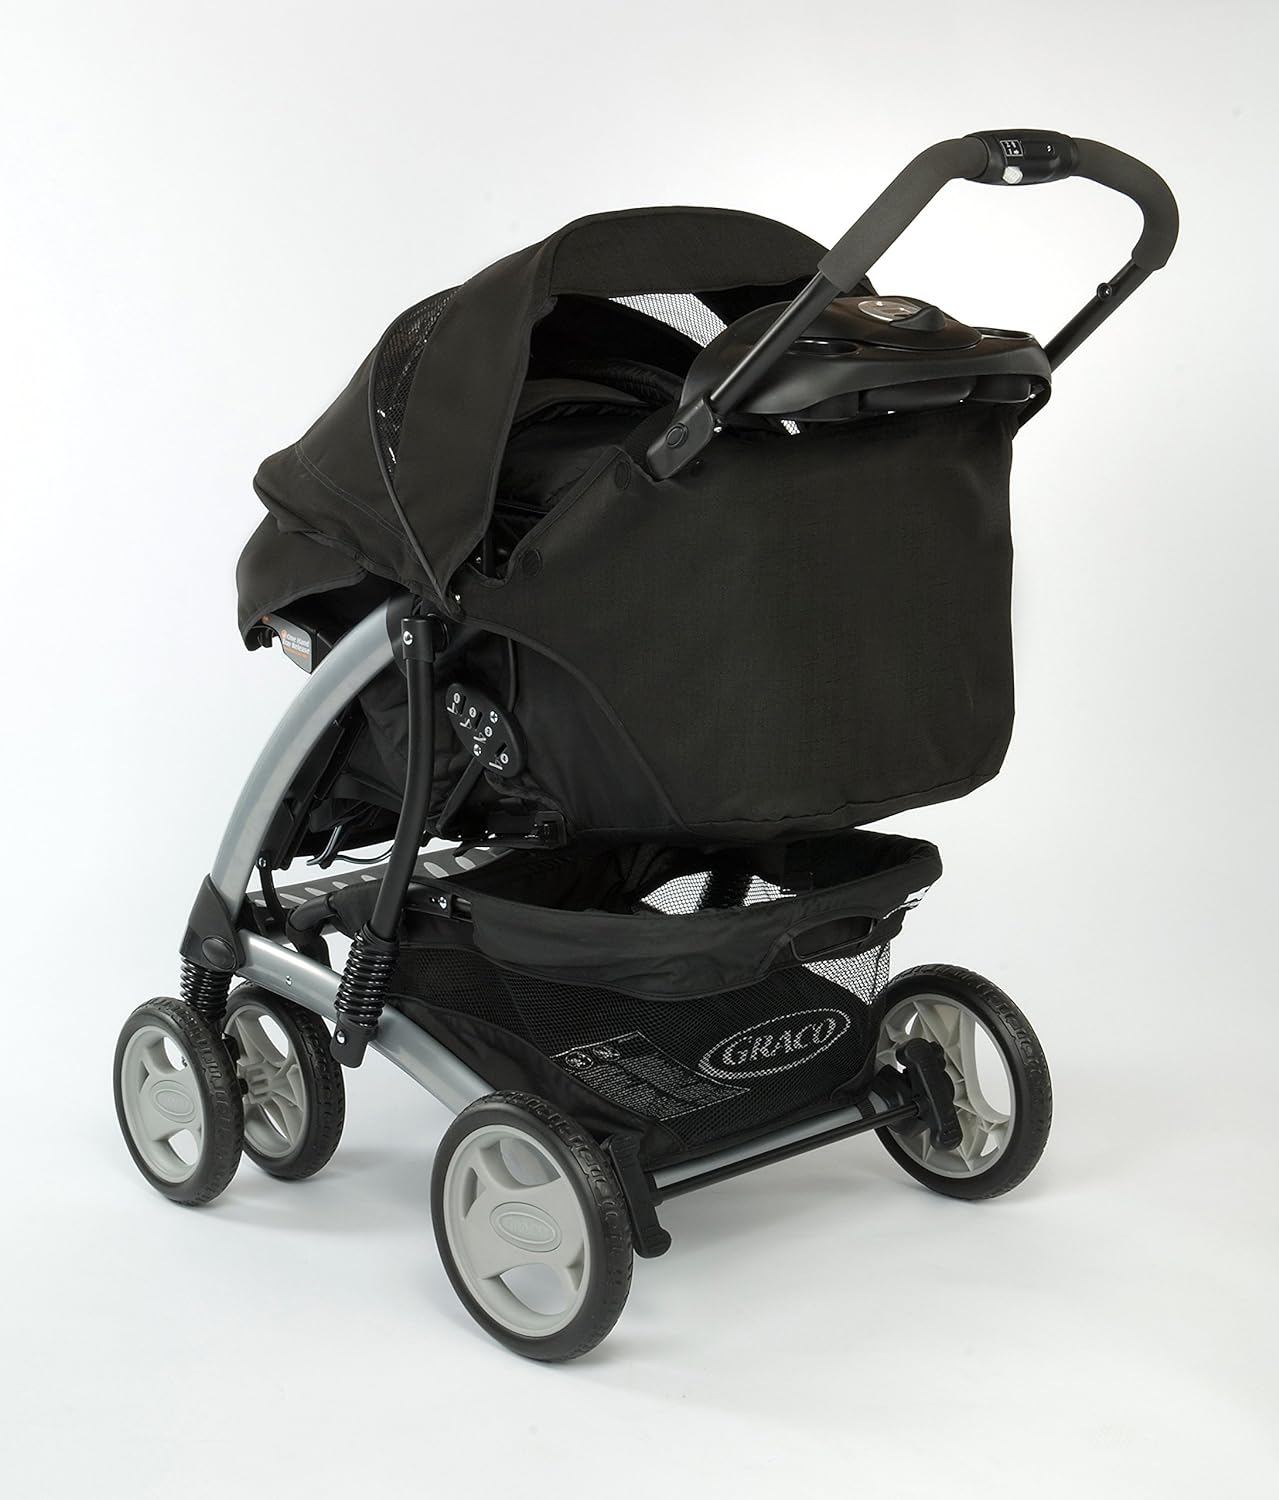 Looking to Buy the Best Graco Stroller. Here